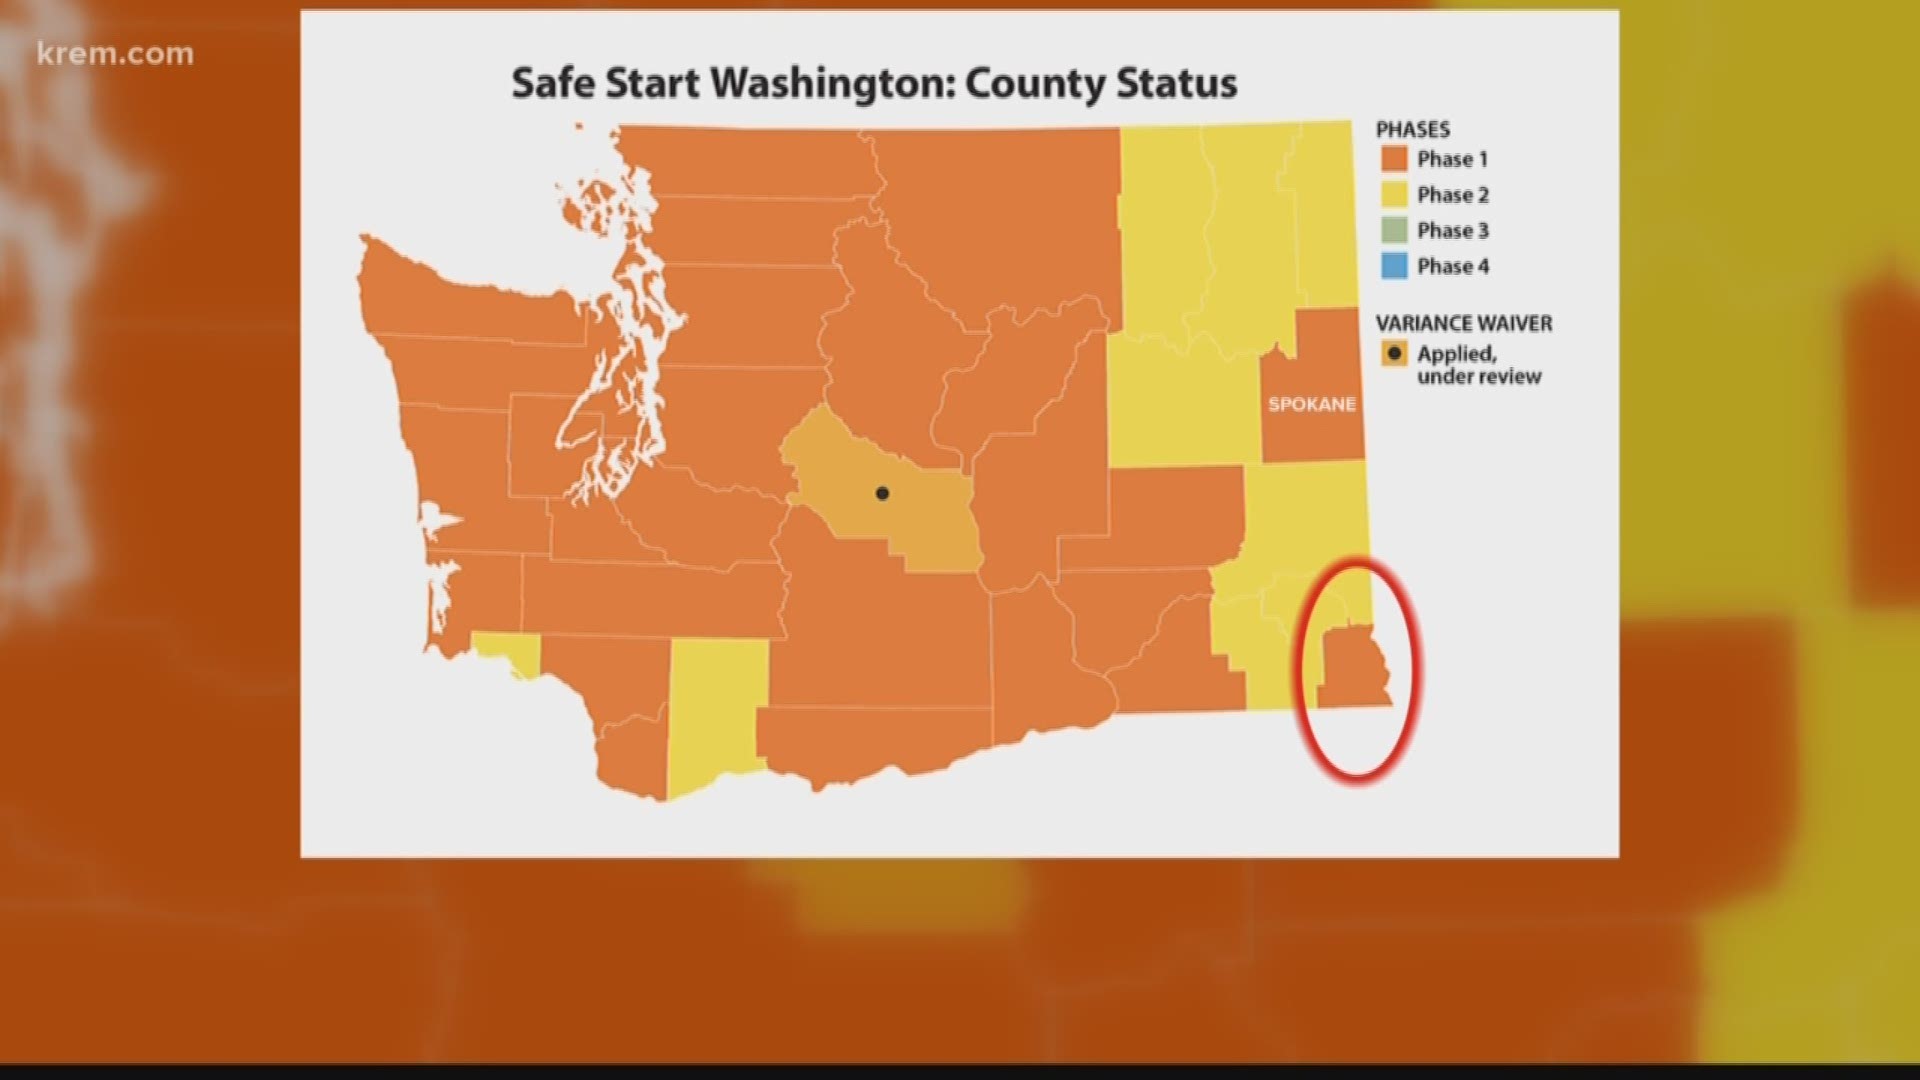 Asotin County joined a list of nine Washington counties that have been approved to move to Phase 2 of Gov. Inslee's reopening plan.